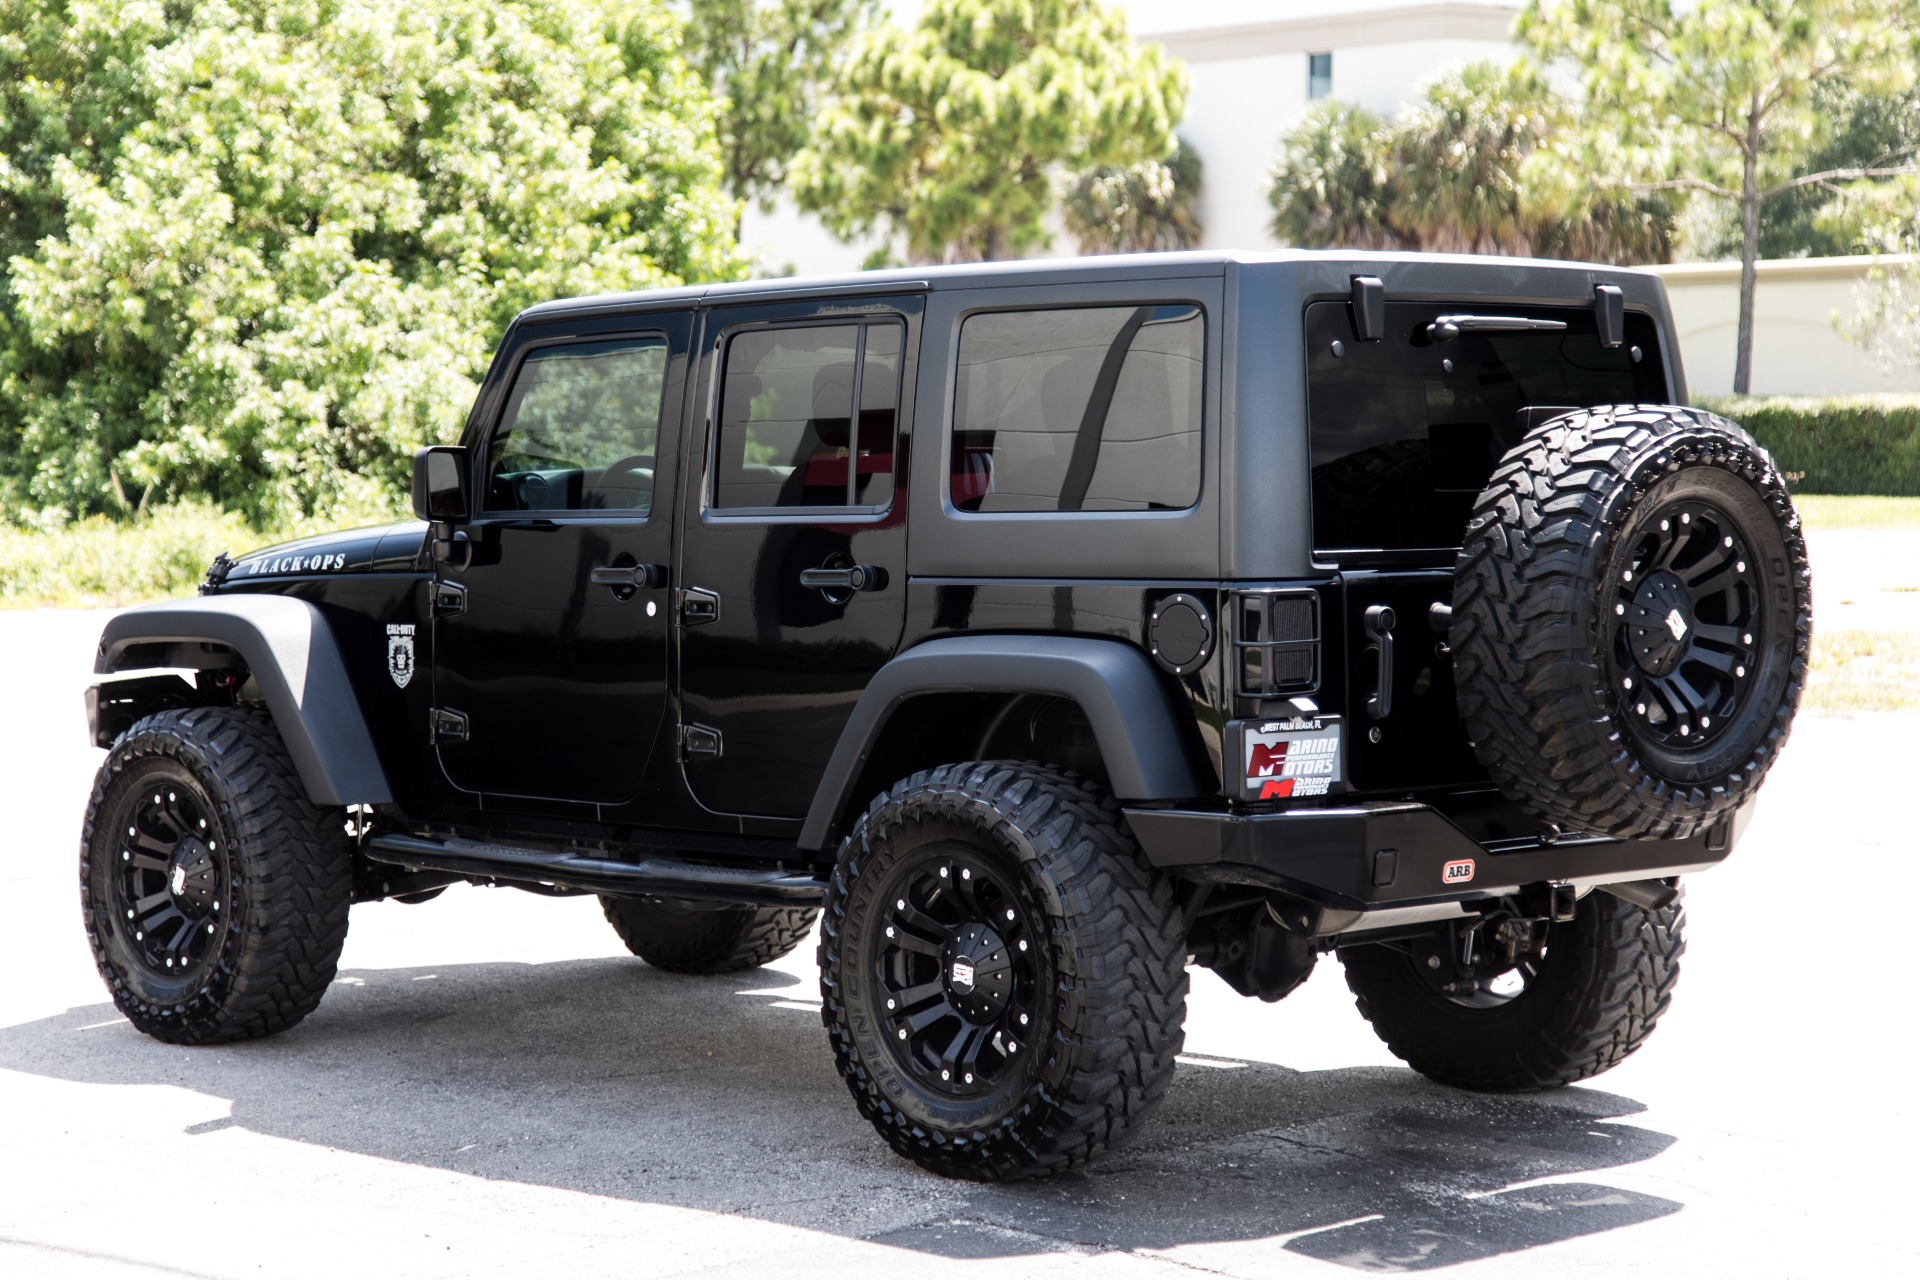 Used-2011-Jeep-Wrangler-Unlimited-Rubicon-Black-Ops-Edition.